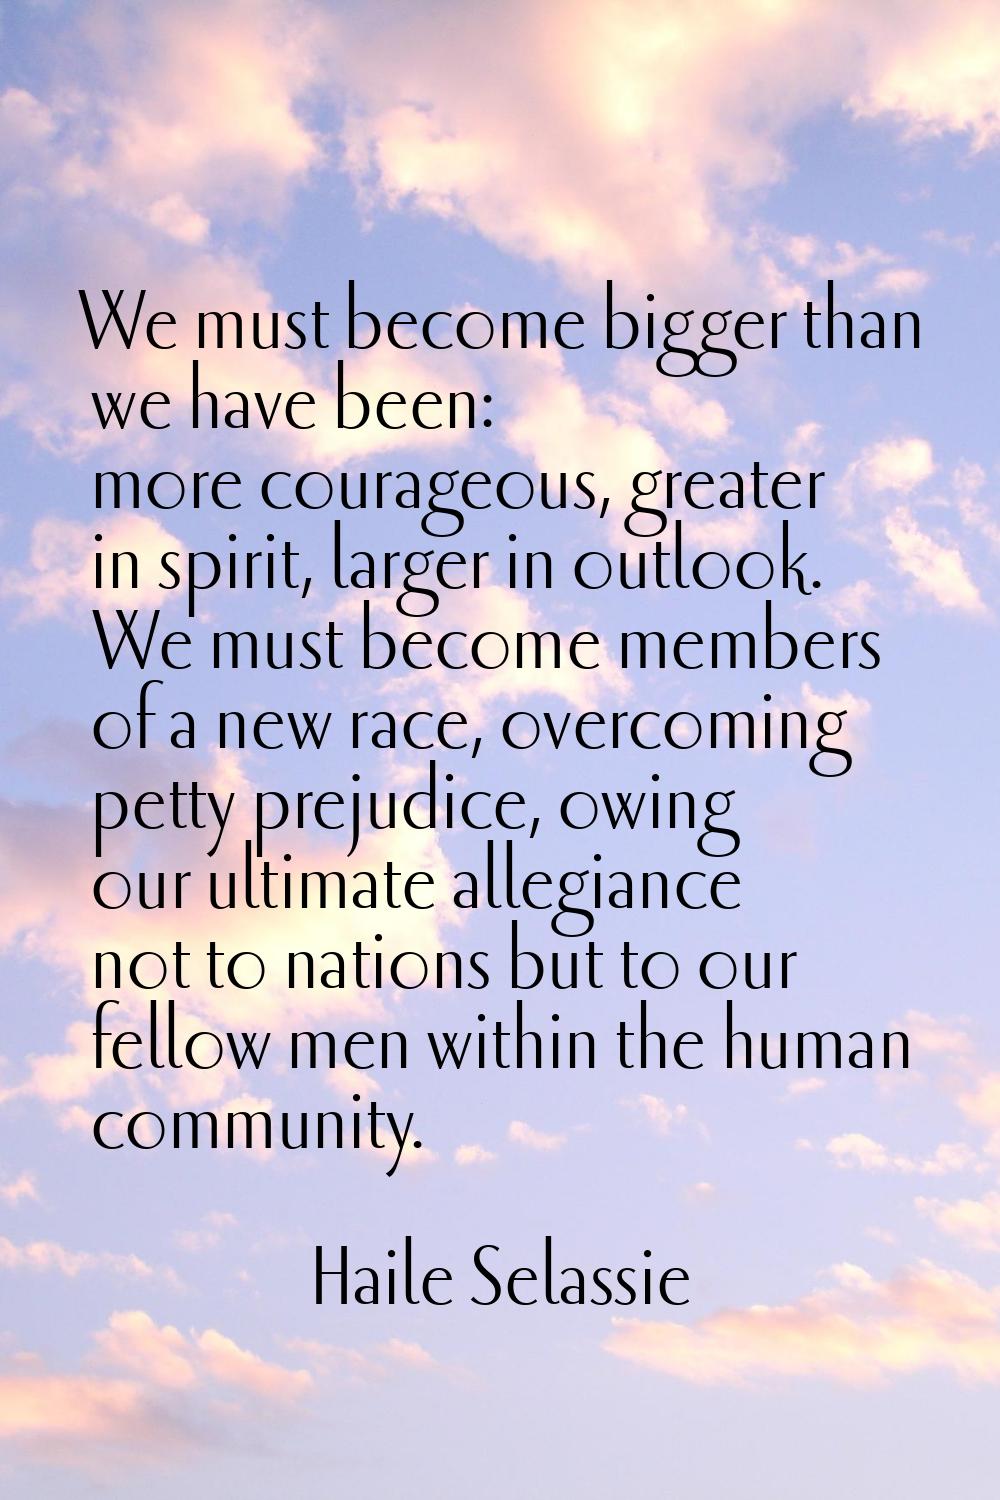 We must become bigger than we have been: more courageous, greater in spirit, larger in outlook. We 